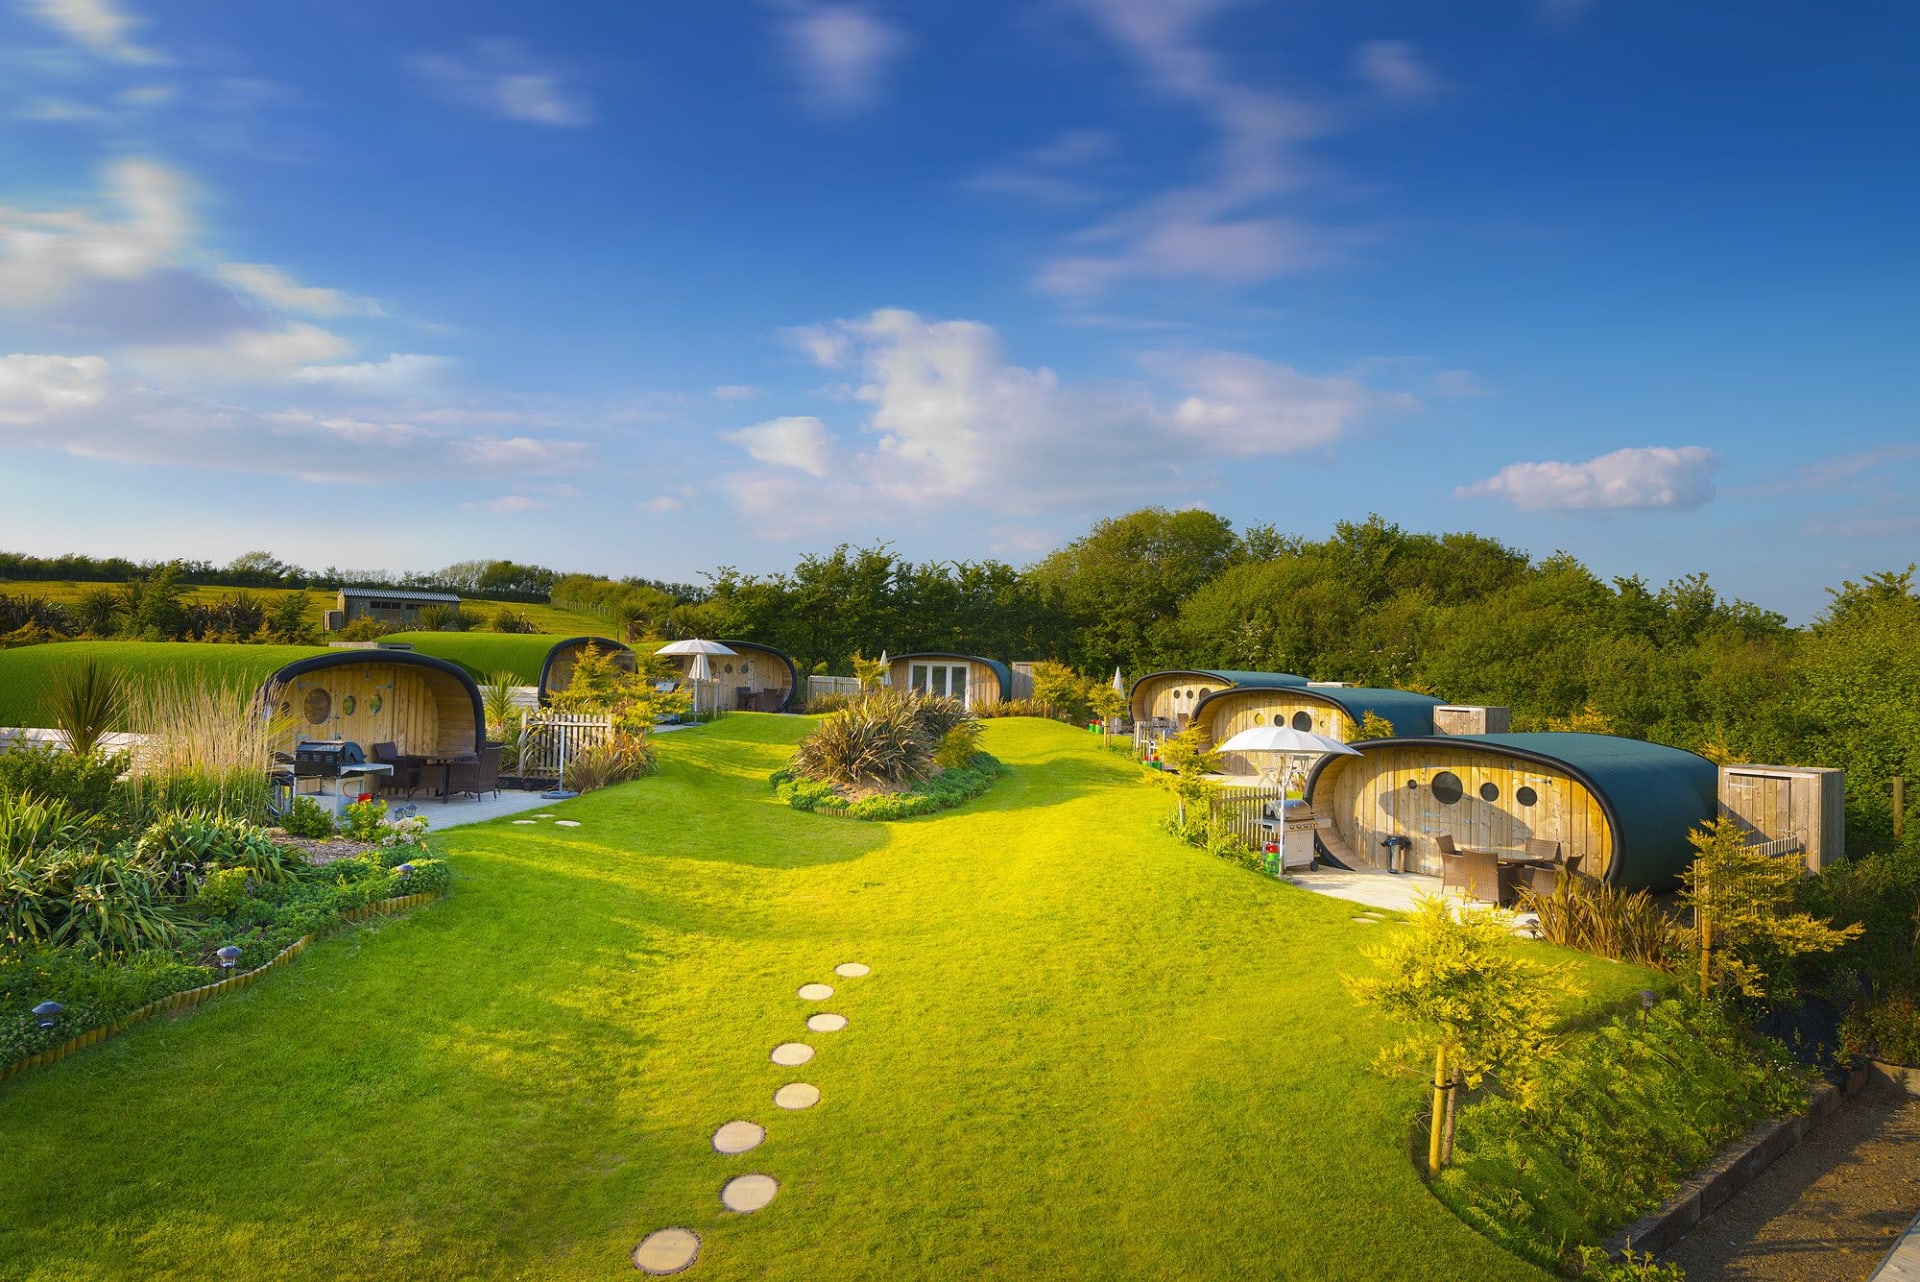 Bring your board and wetsuit—the rest is taken care of at this luxury Cornish glampsite.